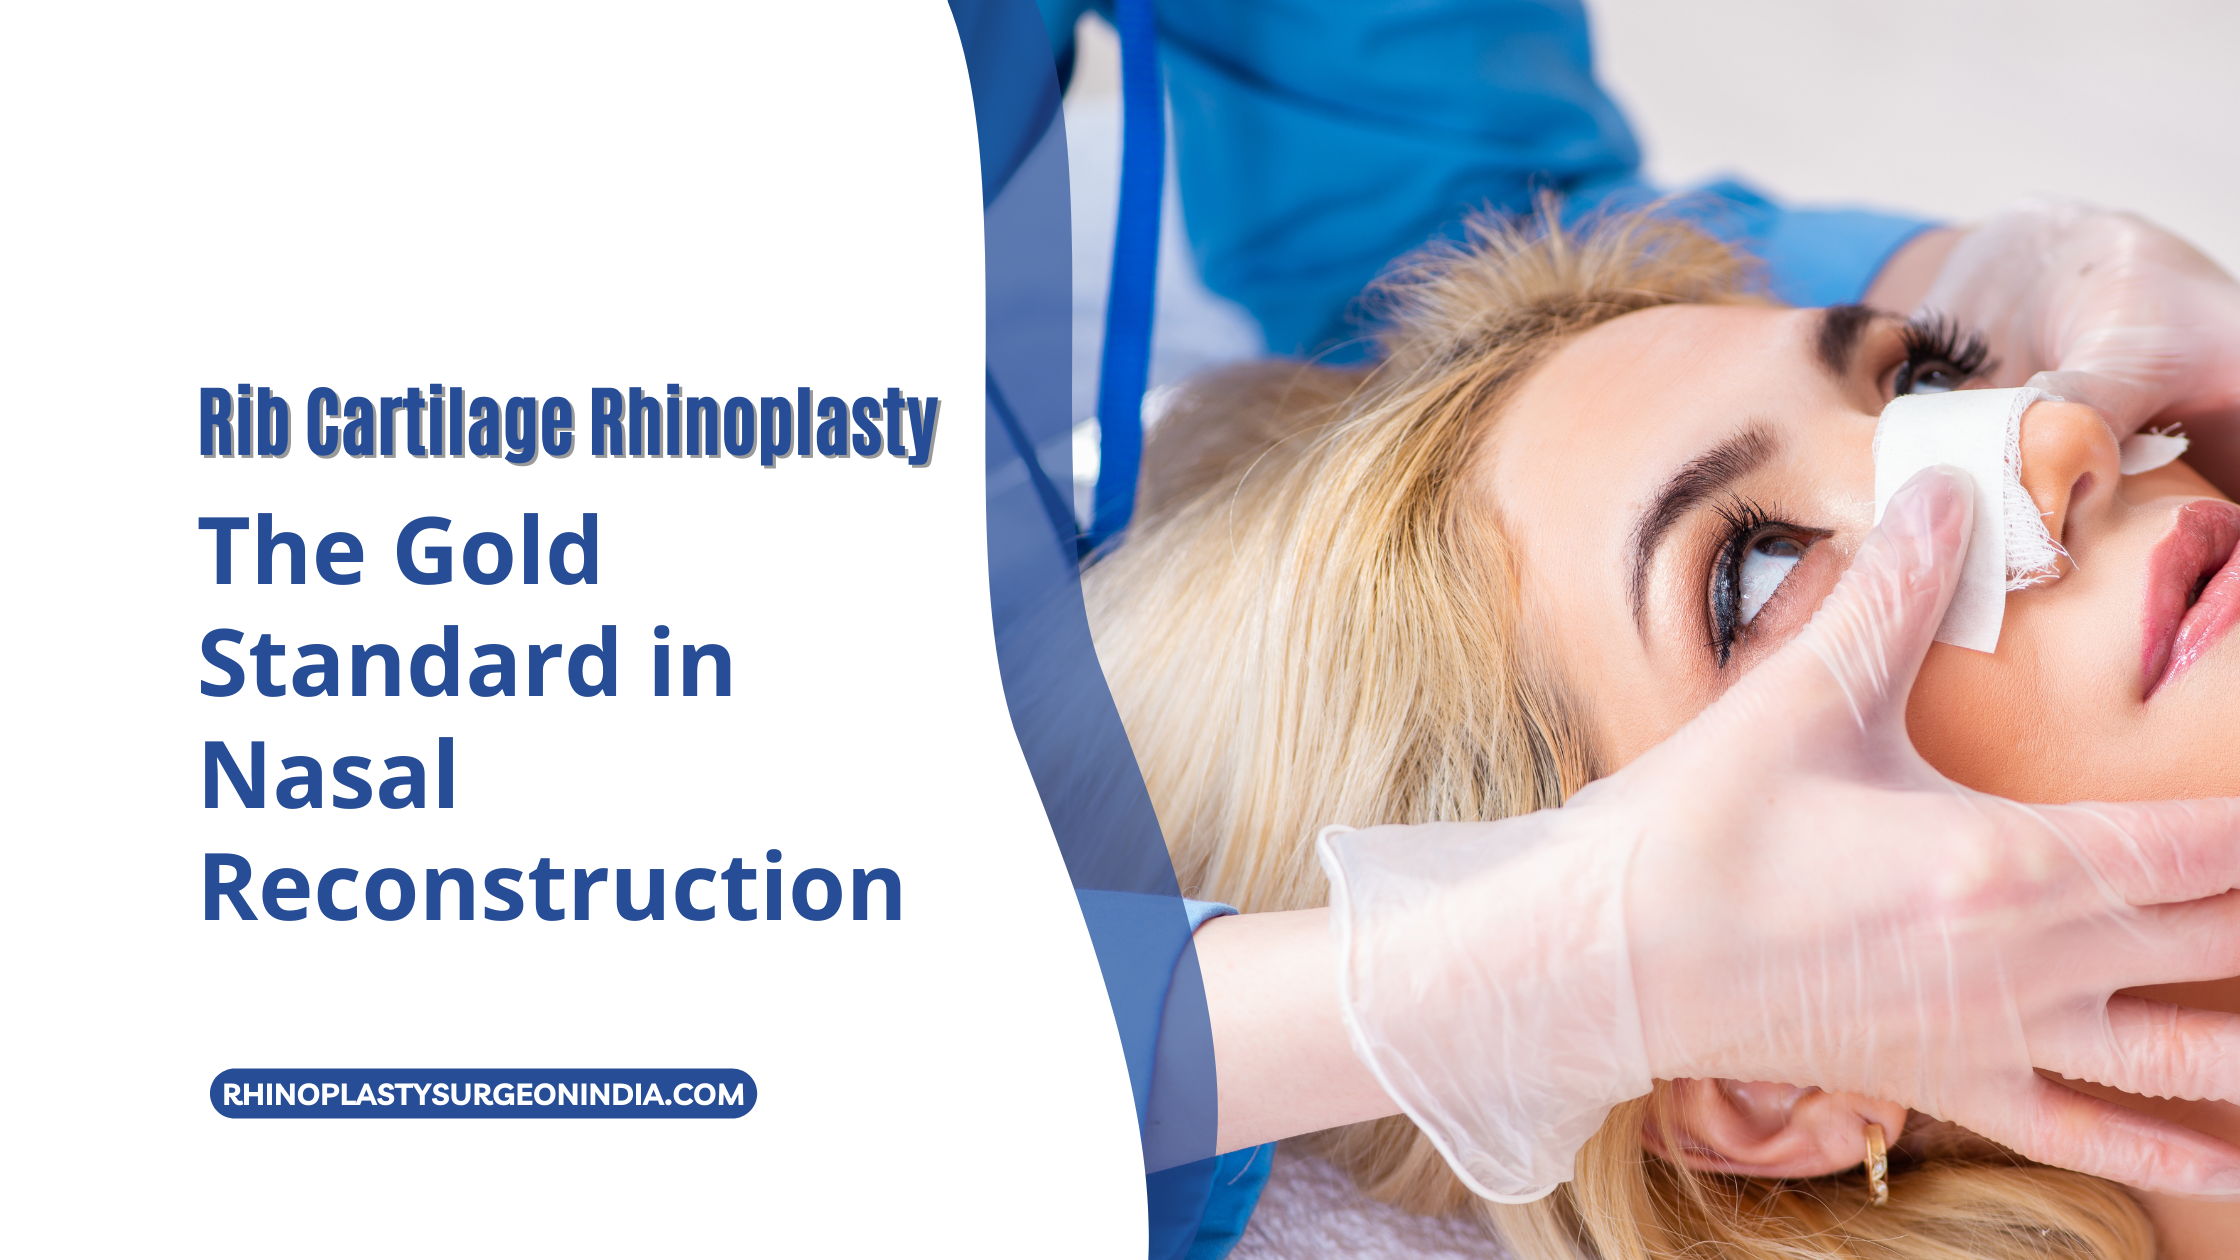 Rib Cartilage Rhinoplasty The Gold Standard in Nasal Reconstruction